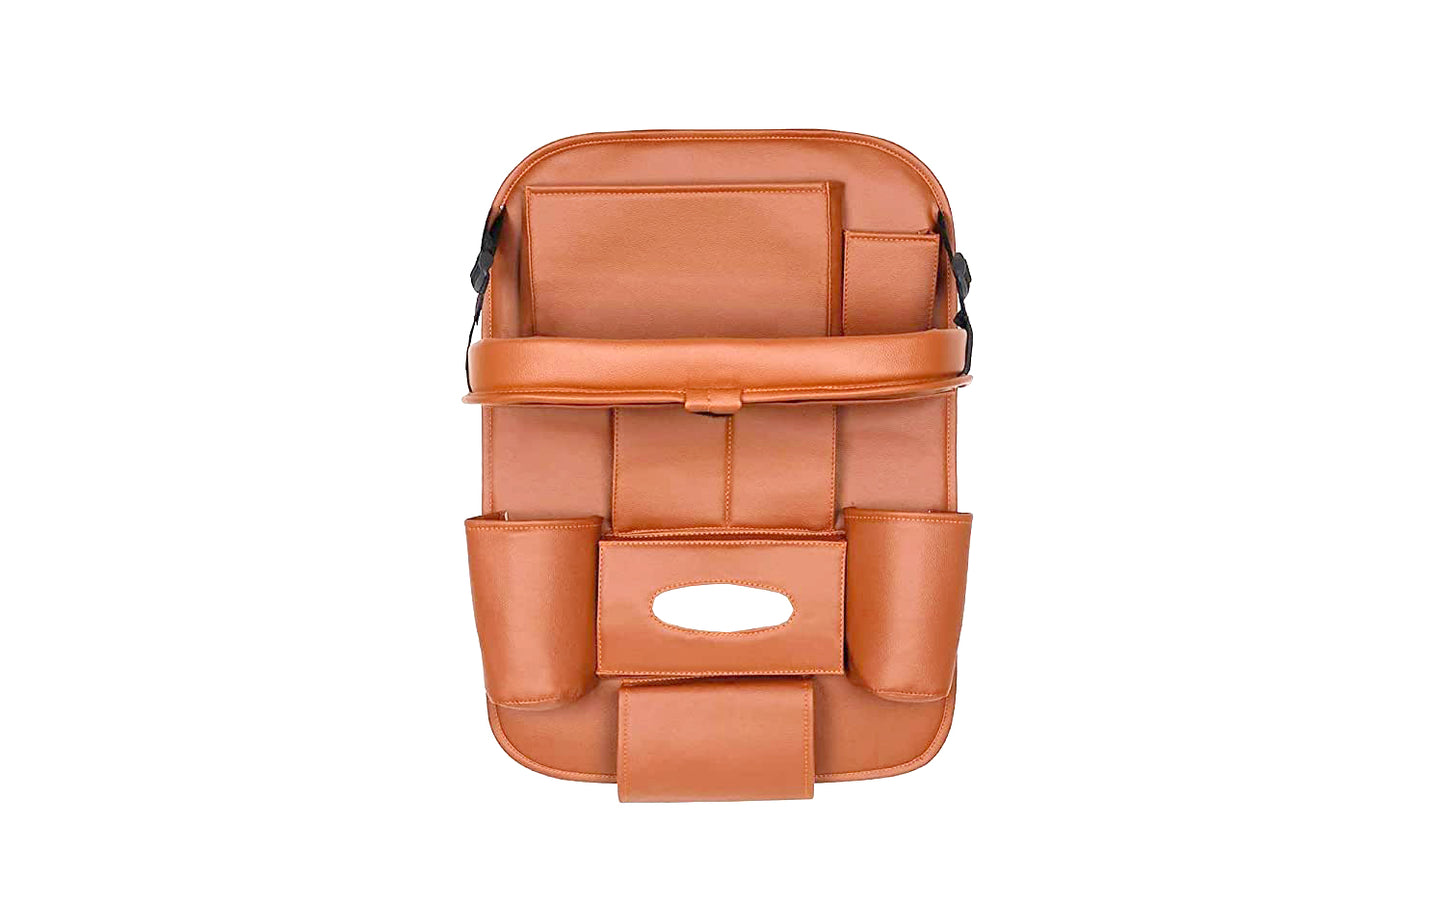 Oshotto Car Backseat Storage Organizer with Foldable Tray, Multi-Pocket for Bottles, Tissue Boxes Compatible with All Cars (Tan)